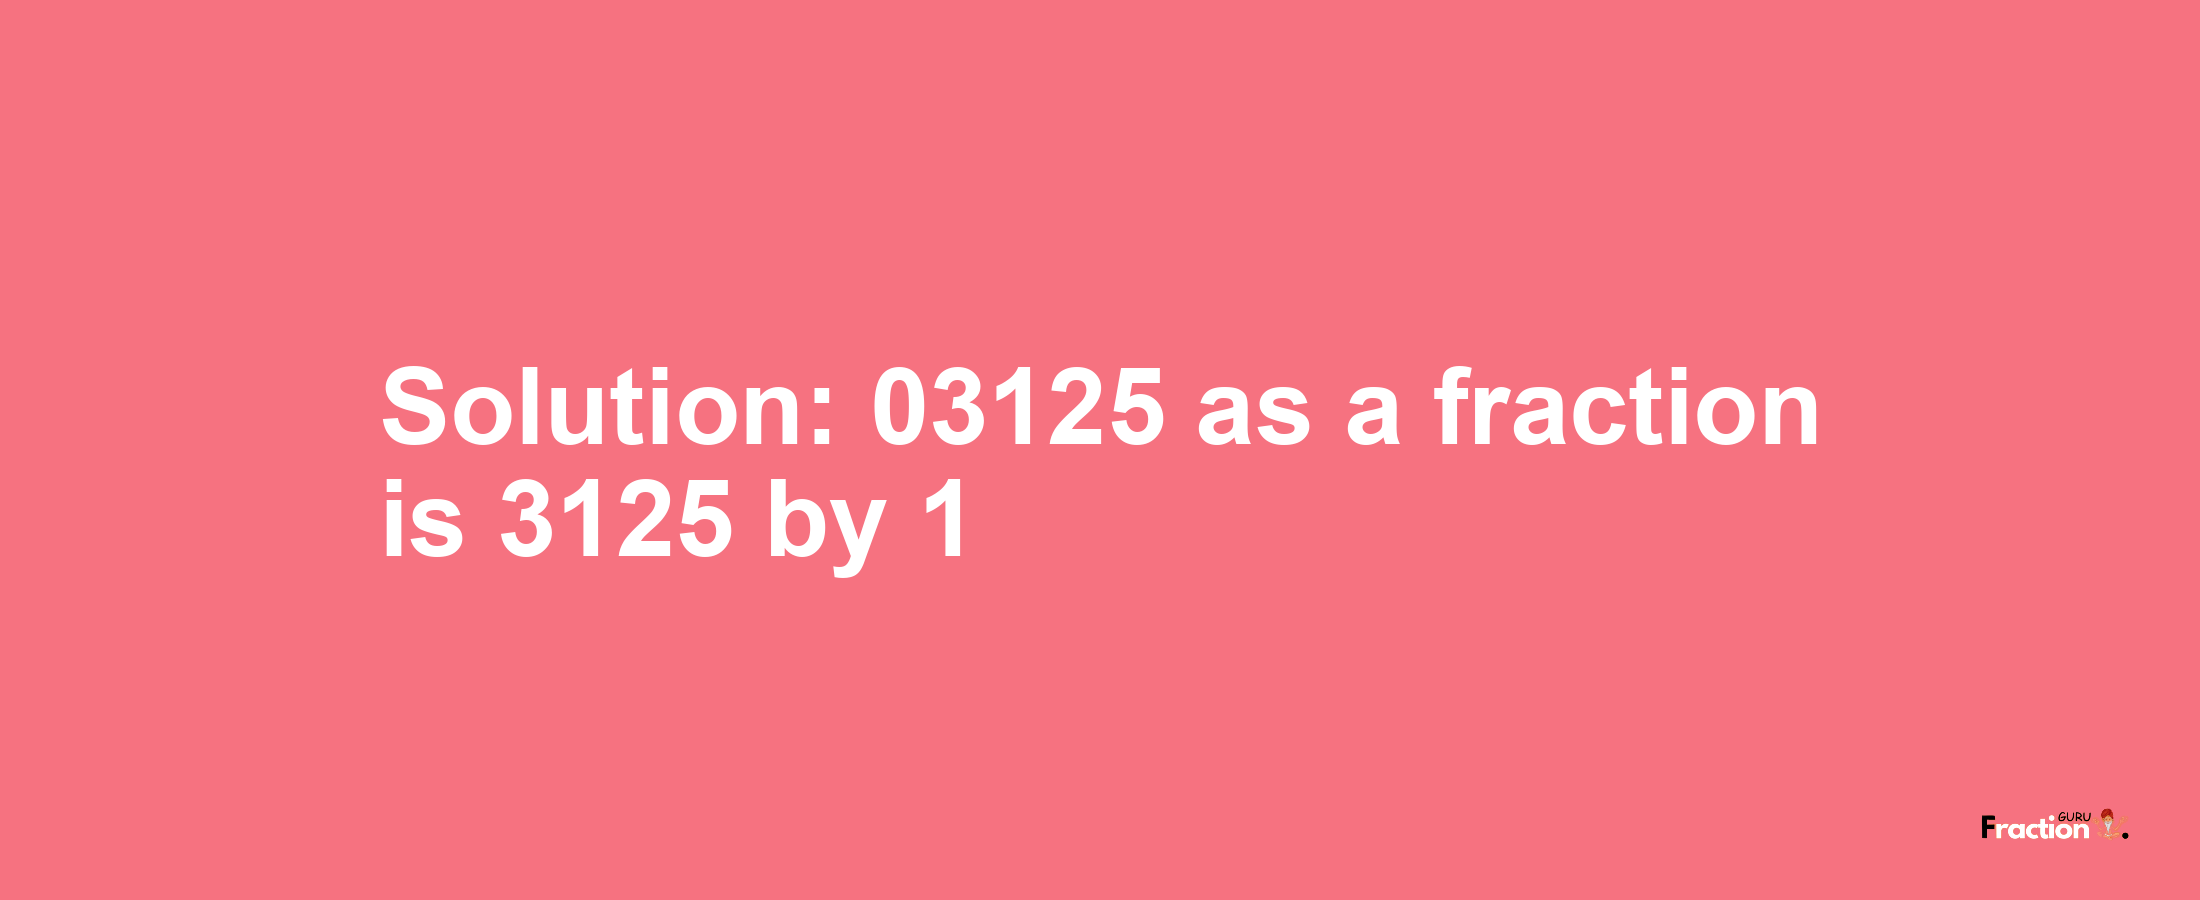 Solution:03125 as a fraction is 3125/1